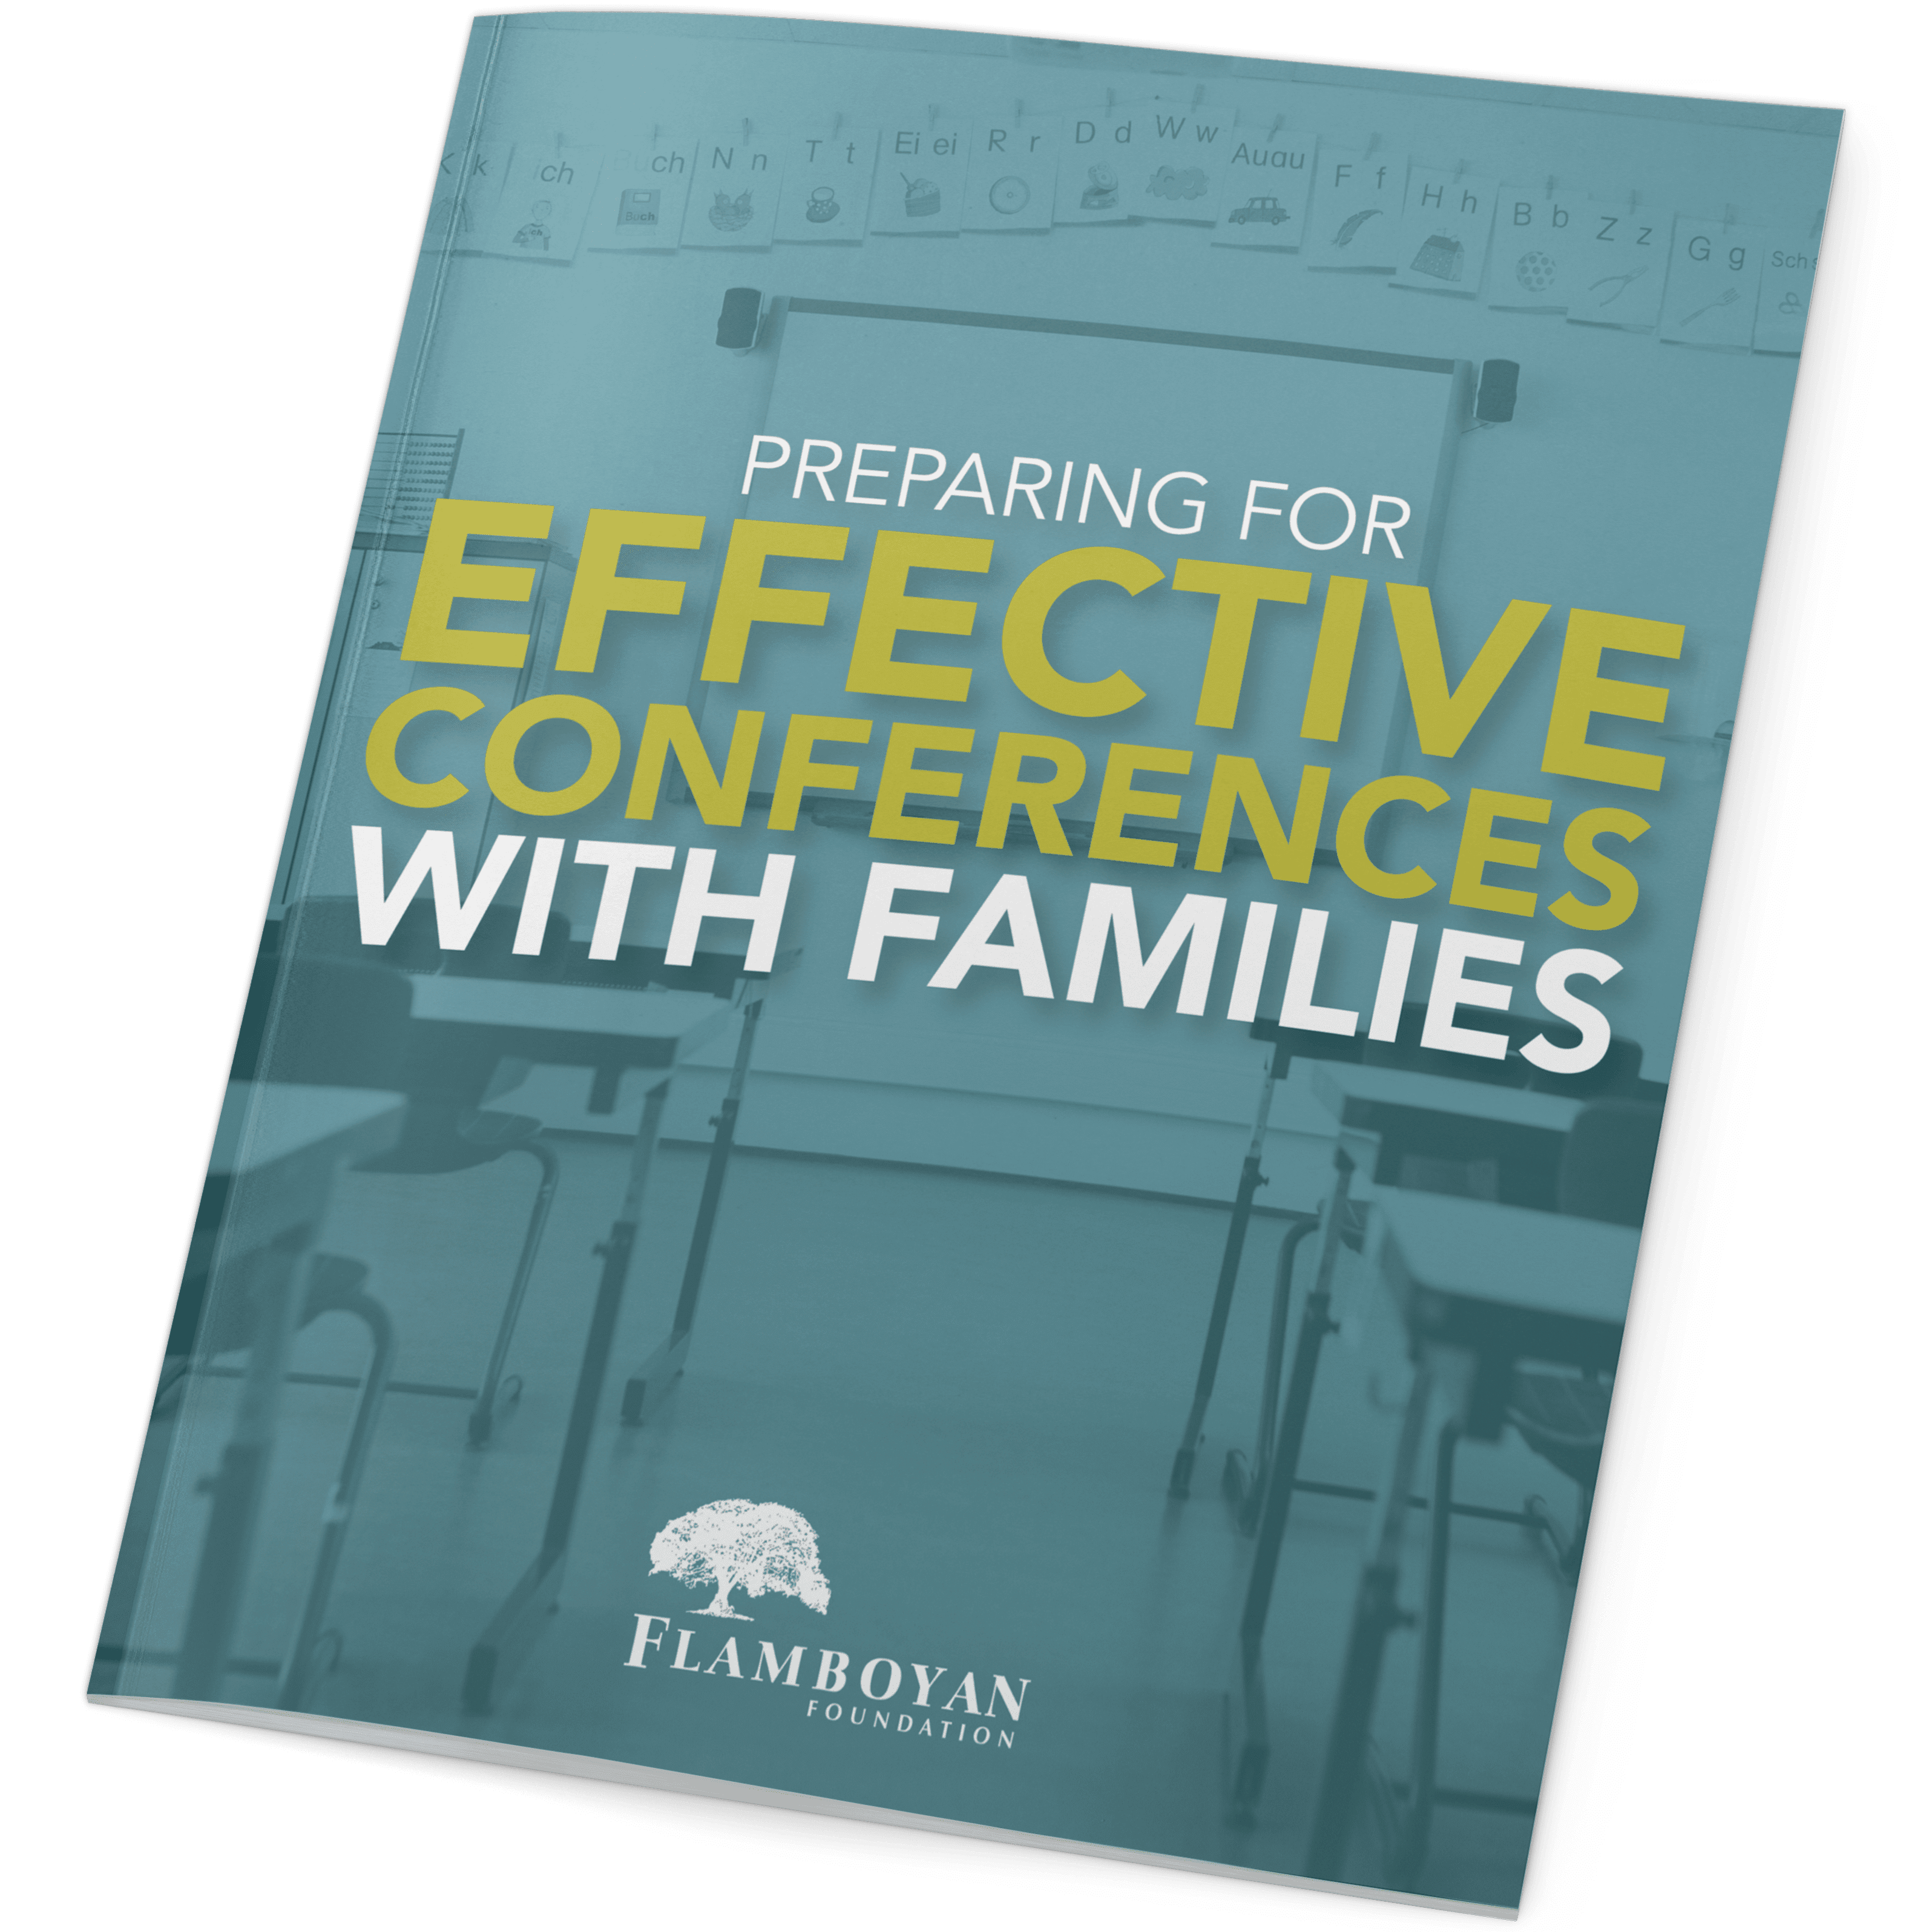 Preparing for Effective Conferences with Families by Flamboyan Foundation